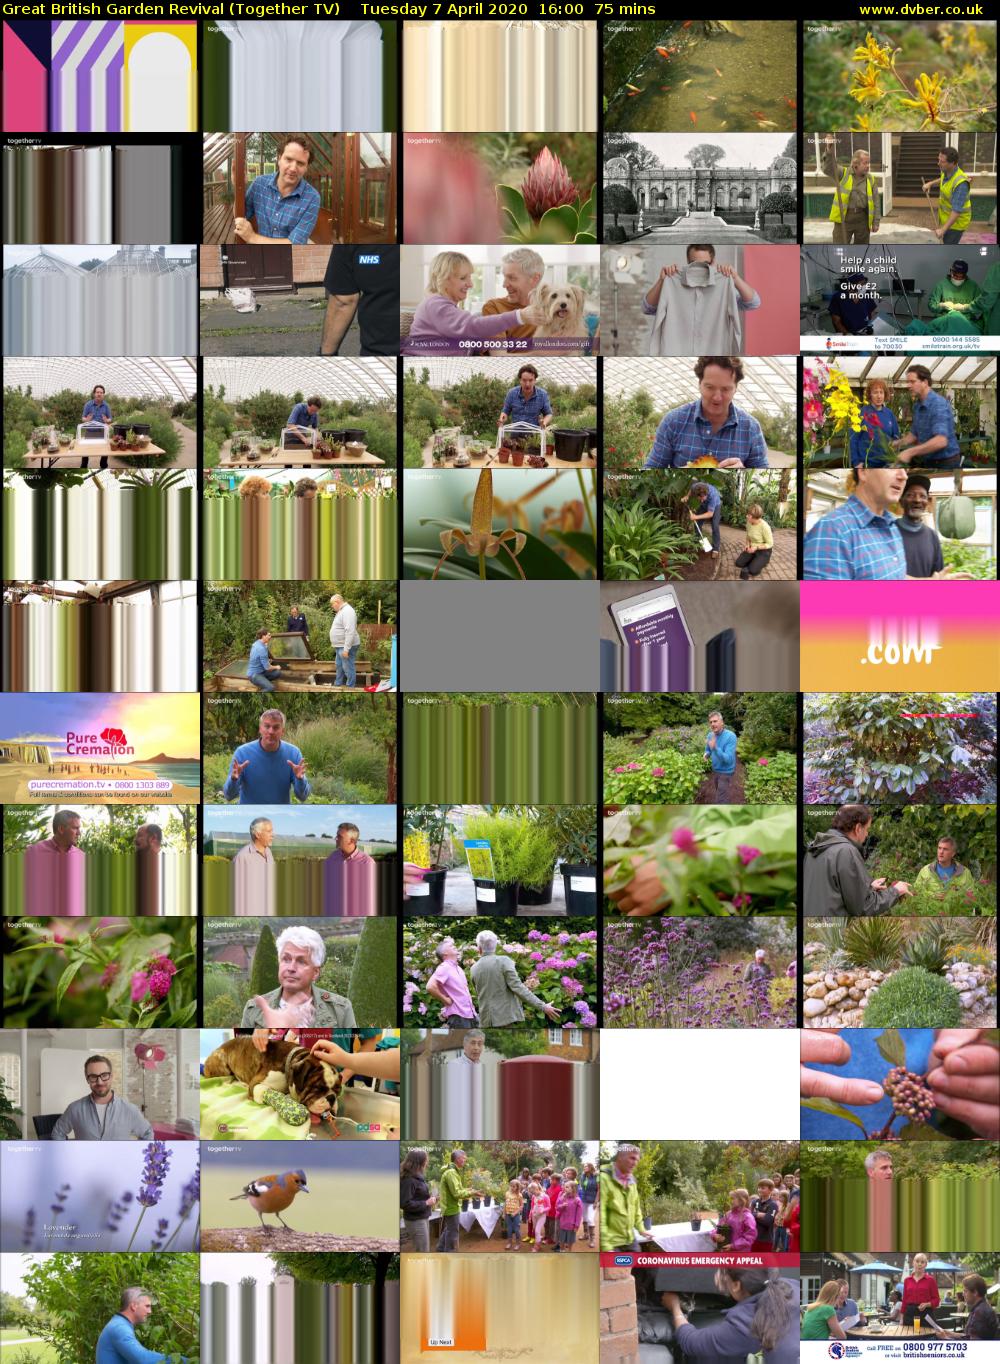 Great British Garden Revival (Together TV) Tuesday 7 April 2020 16:00 - 17:15